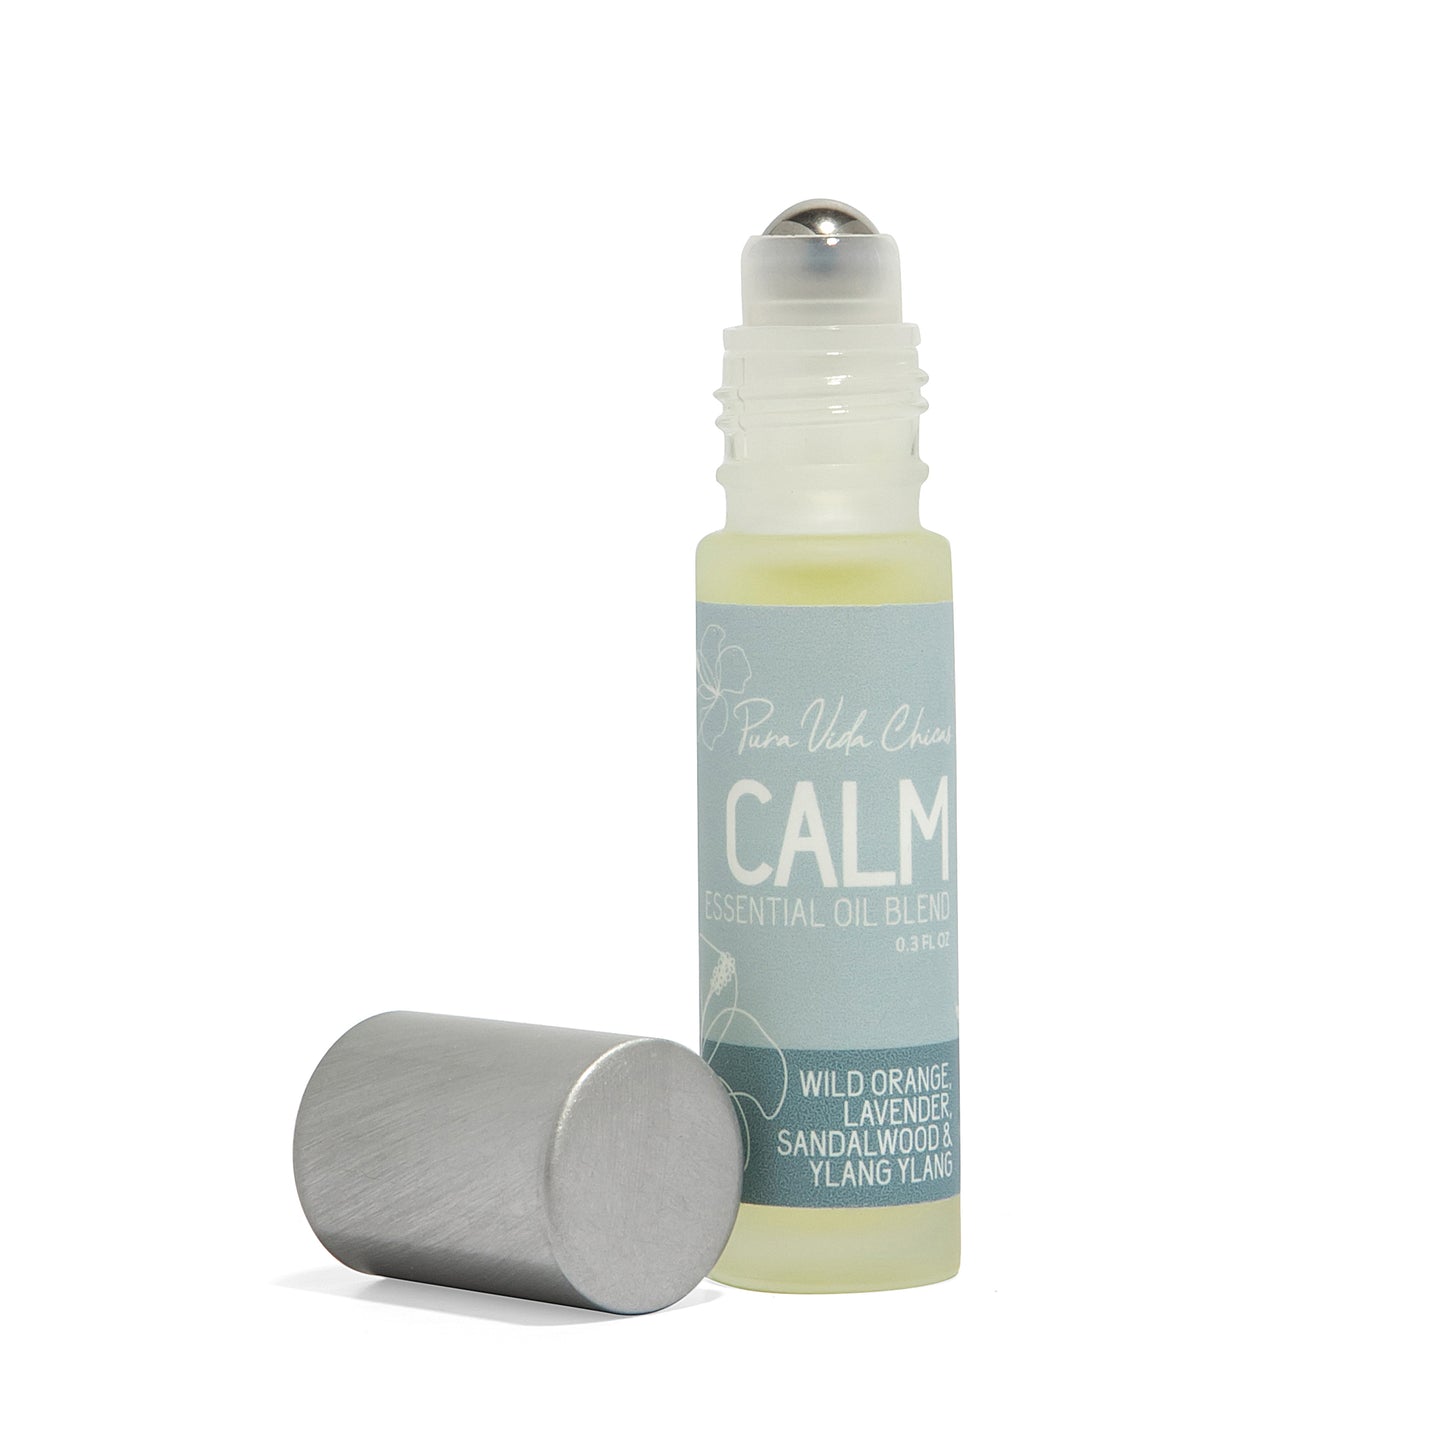 Calm Aromatherapy Roller